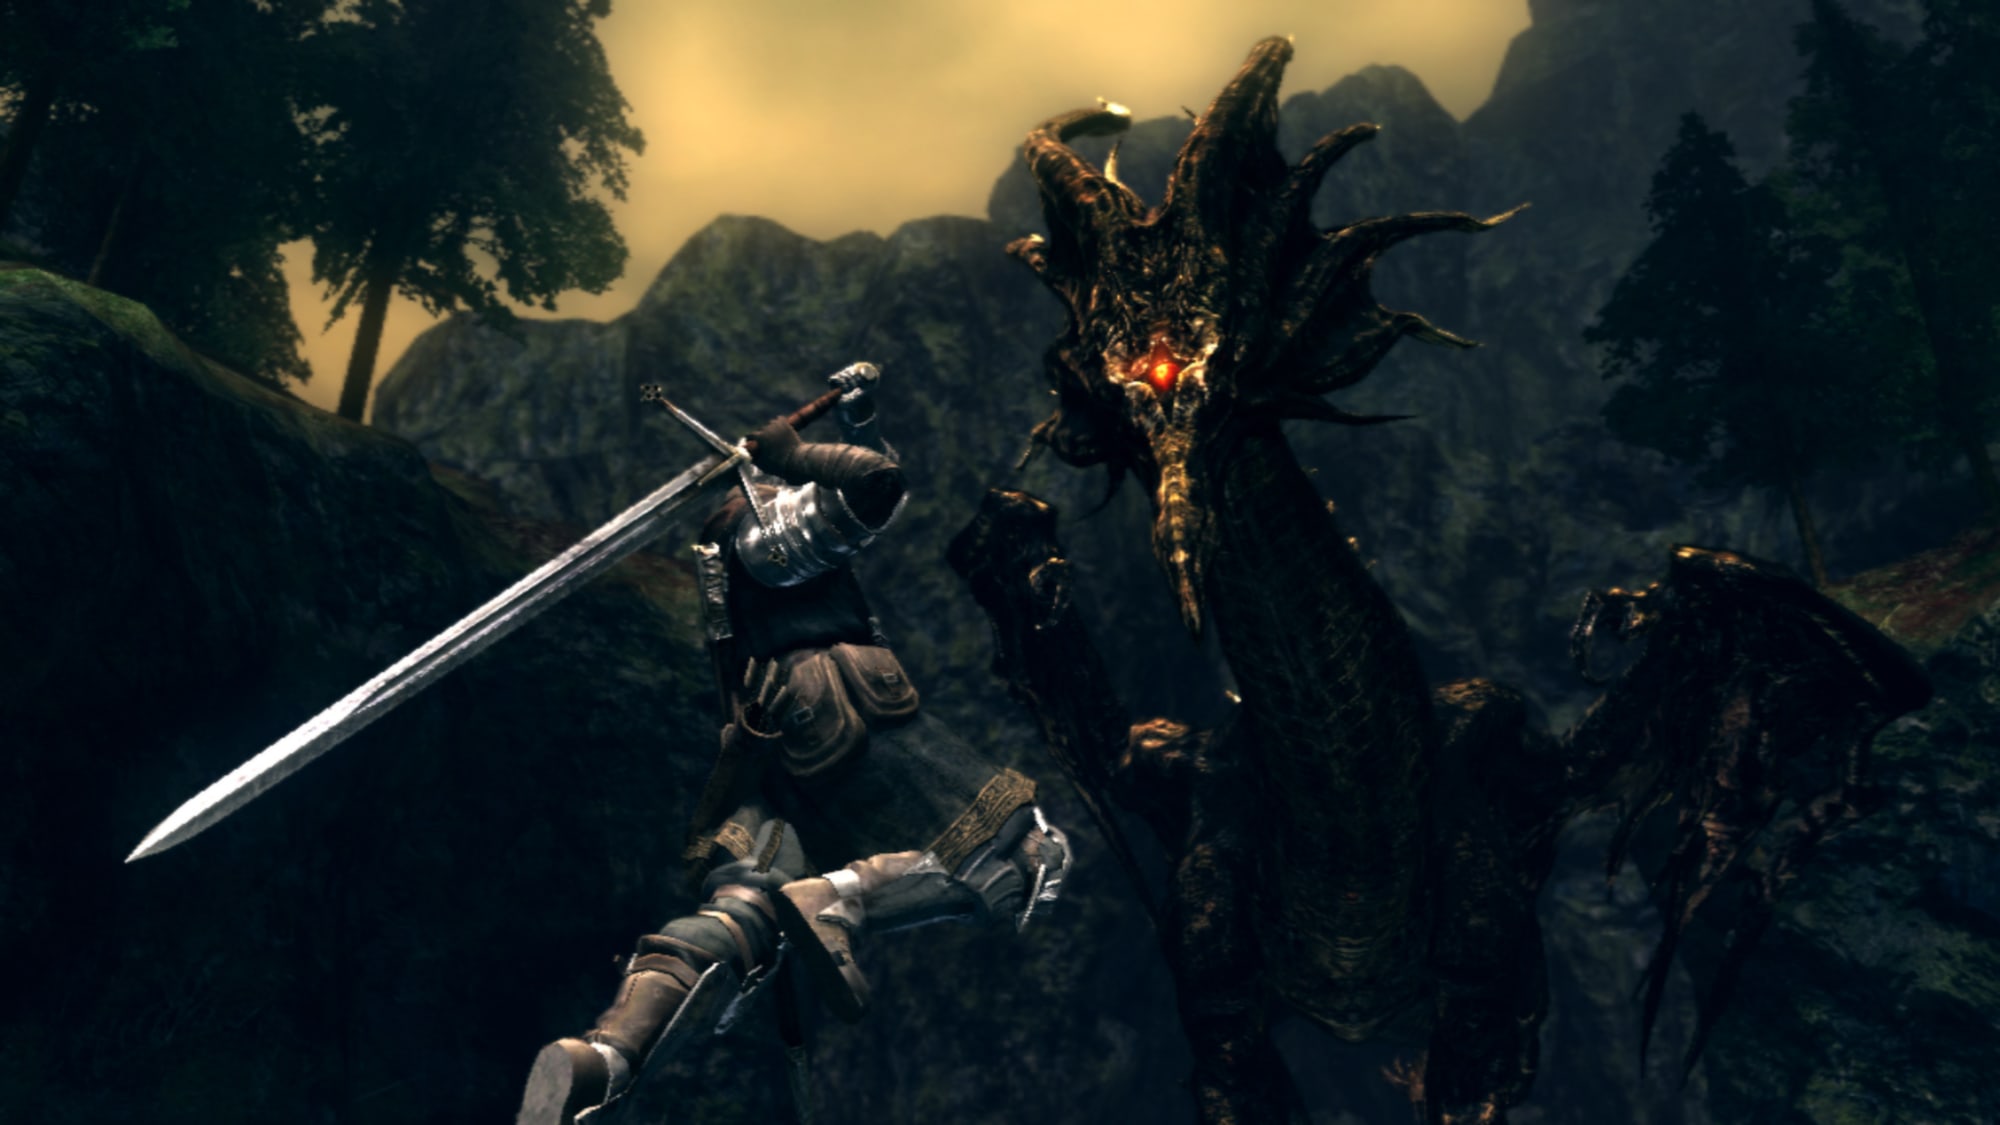 Dark Souls' videogame: Themes of ruin harken to images popularized